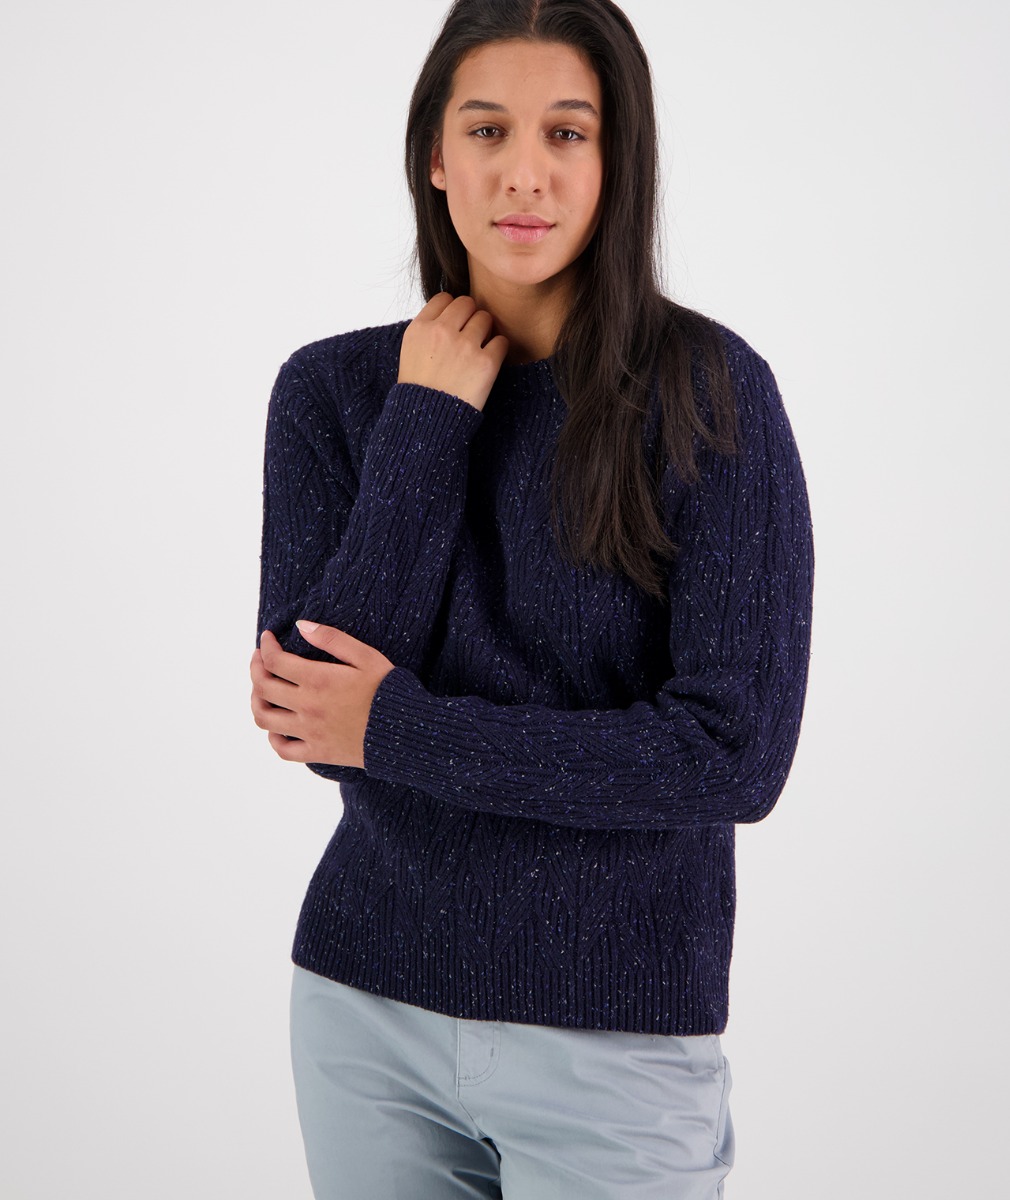 Swanndri Women's Kennedy Point Cable Knit Crew